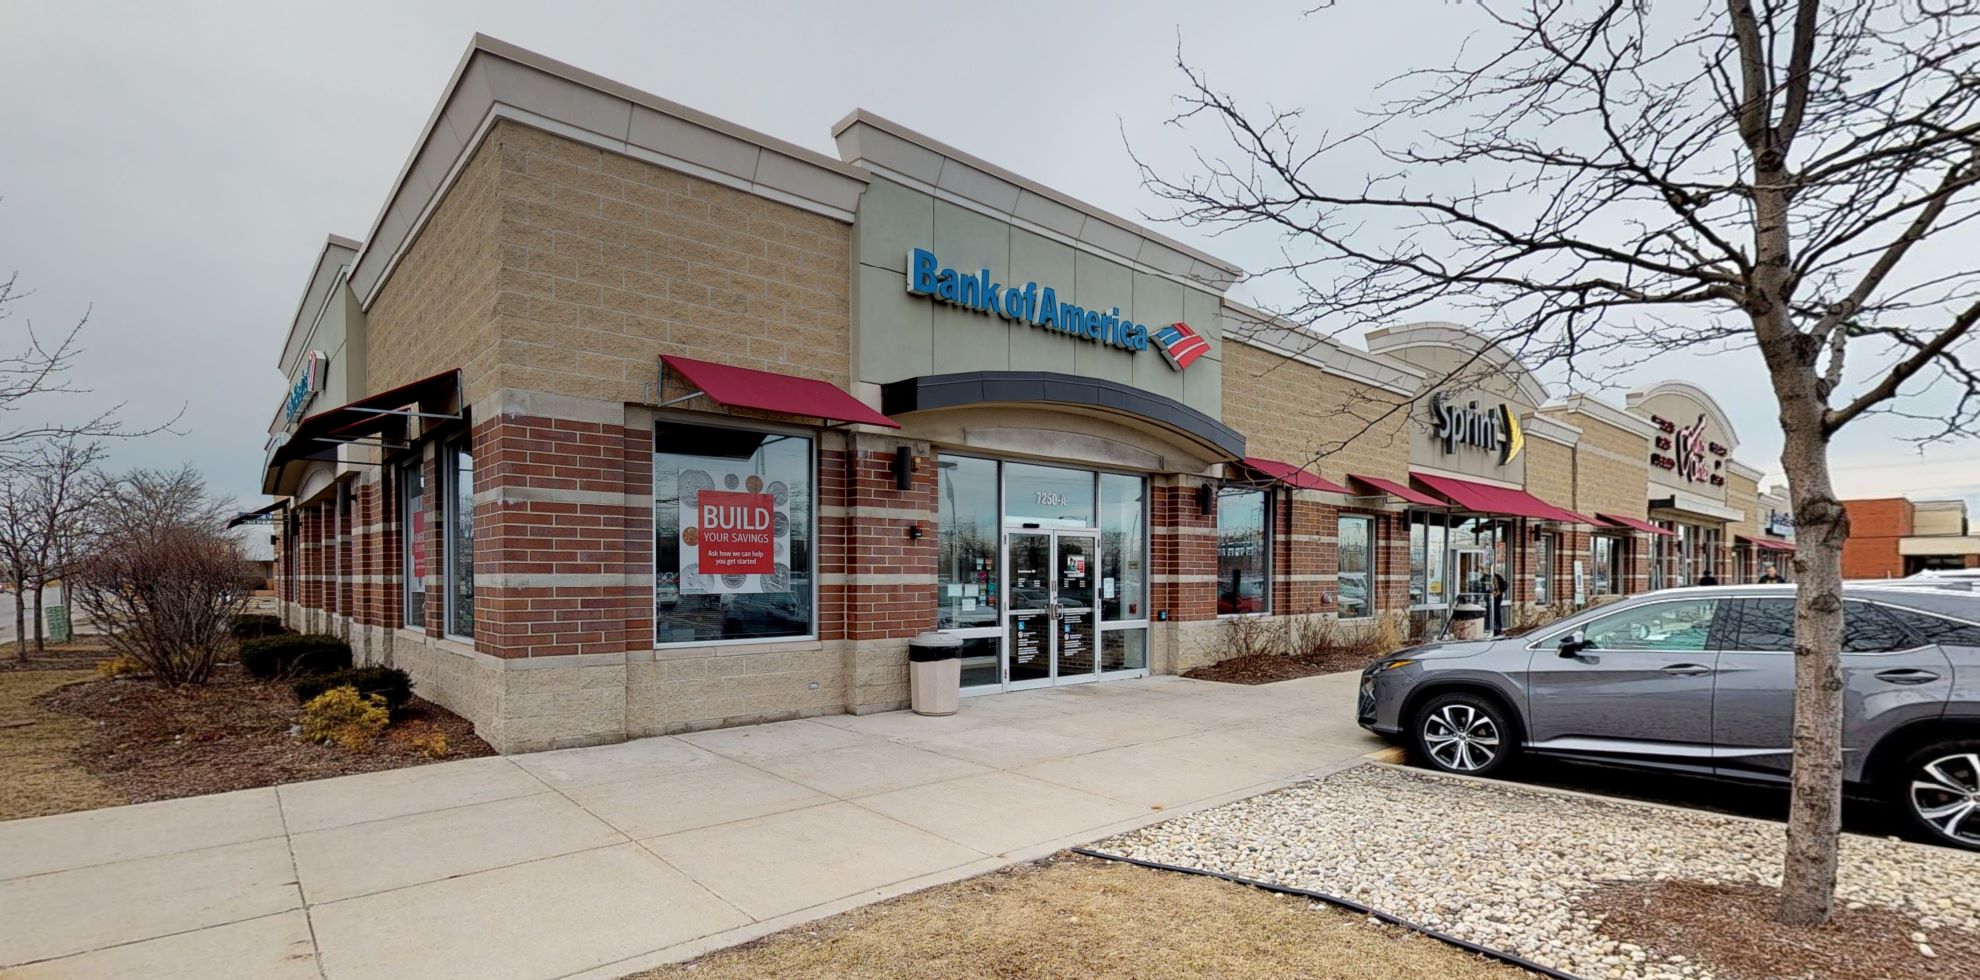 Bank of America financial center with drive-thru ATM | 7250-A S Cicero Ave, Chicago, IL 60629